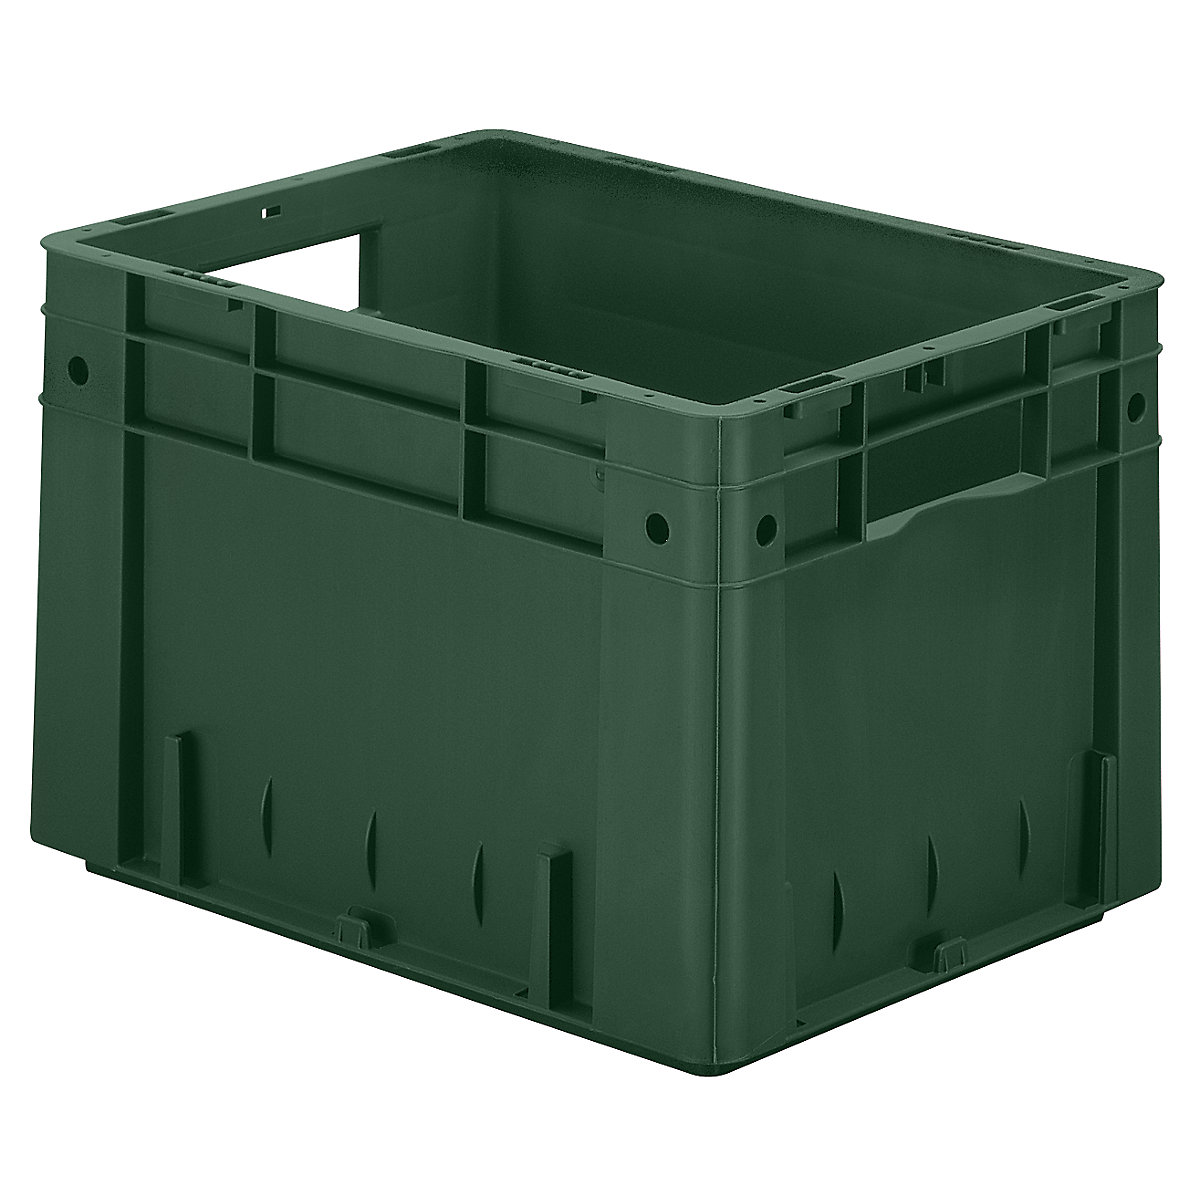 Heavy duty Euro container, polypropylene, capacity 23.3 l, LxWxH 400 x 300 x 270 mm, solid walls, solid base, green, pack of 4